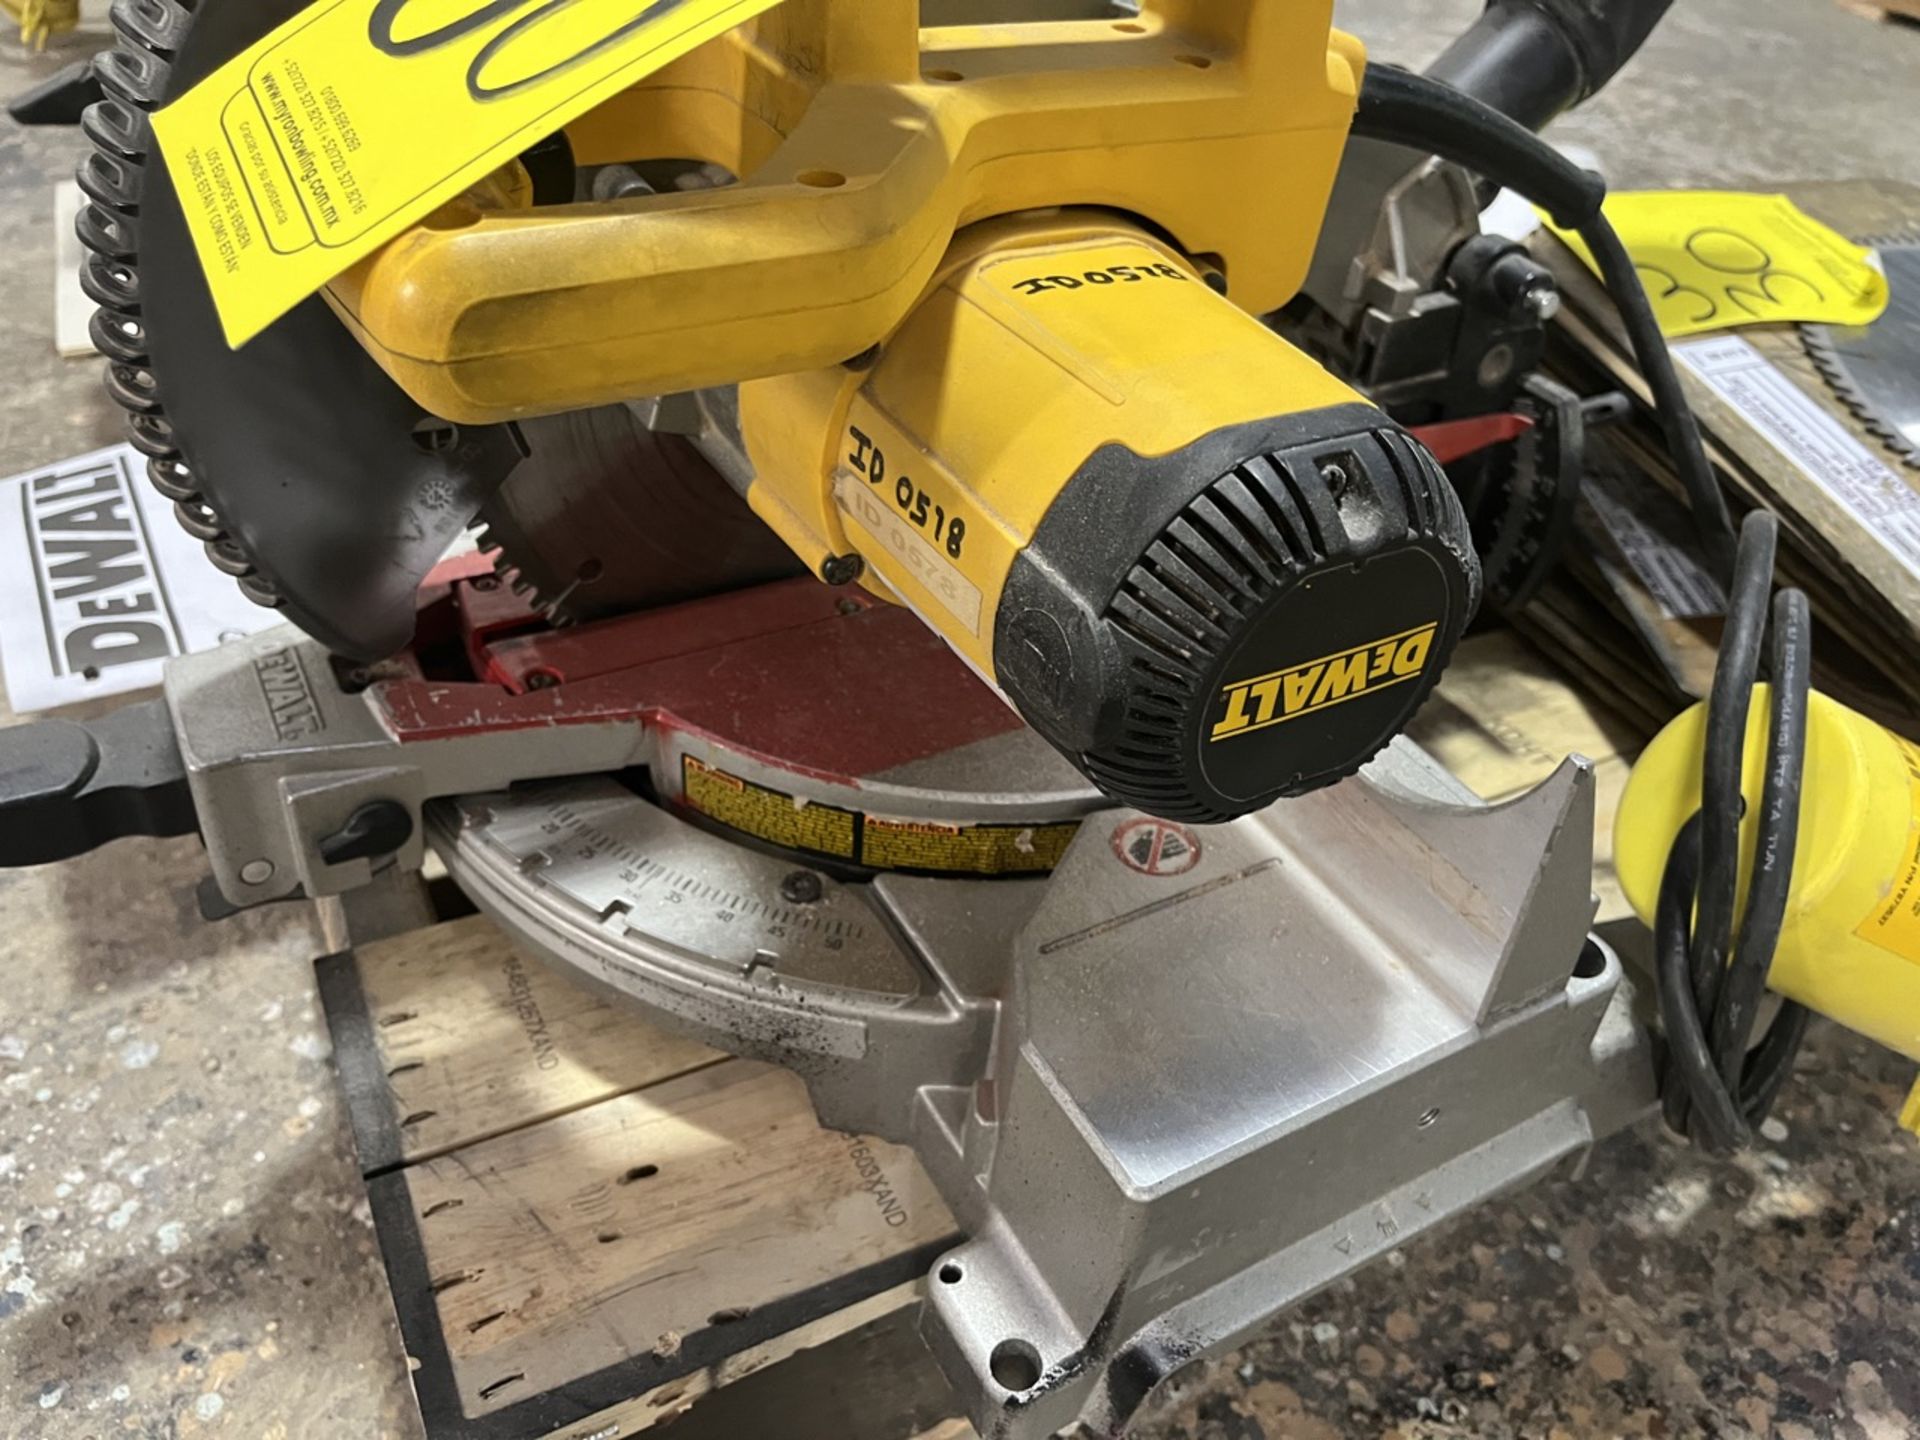 DEWALT 12" Miter Saw, Model DWS780, Serial No. SS, 120V, Includes 5 different sized blades and dust - Image 7 of 10